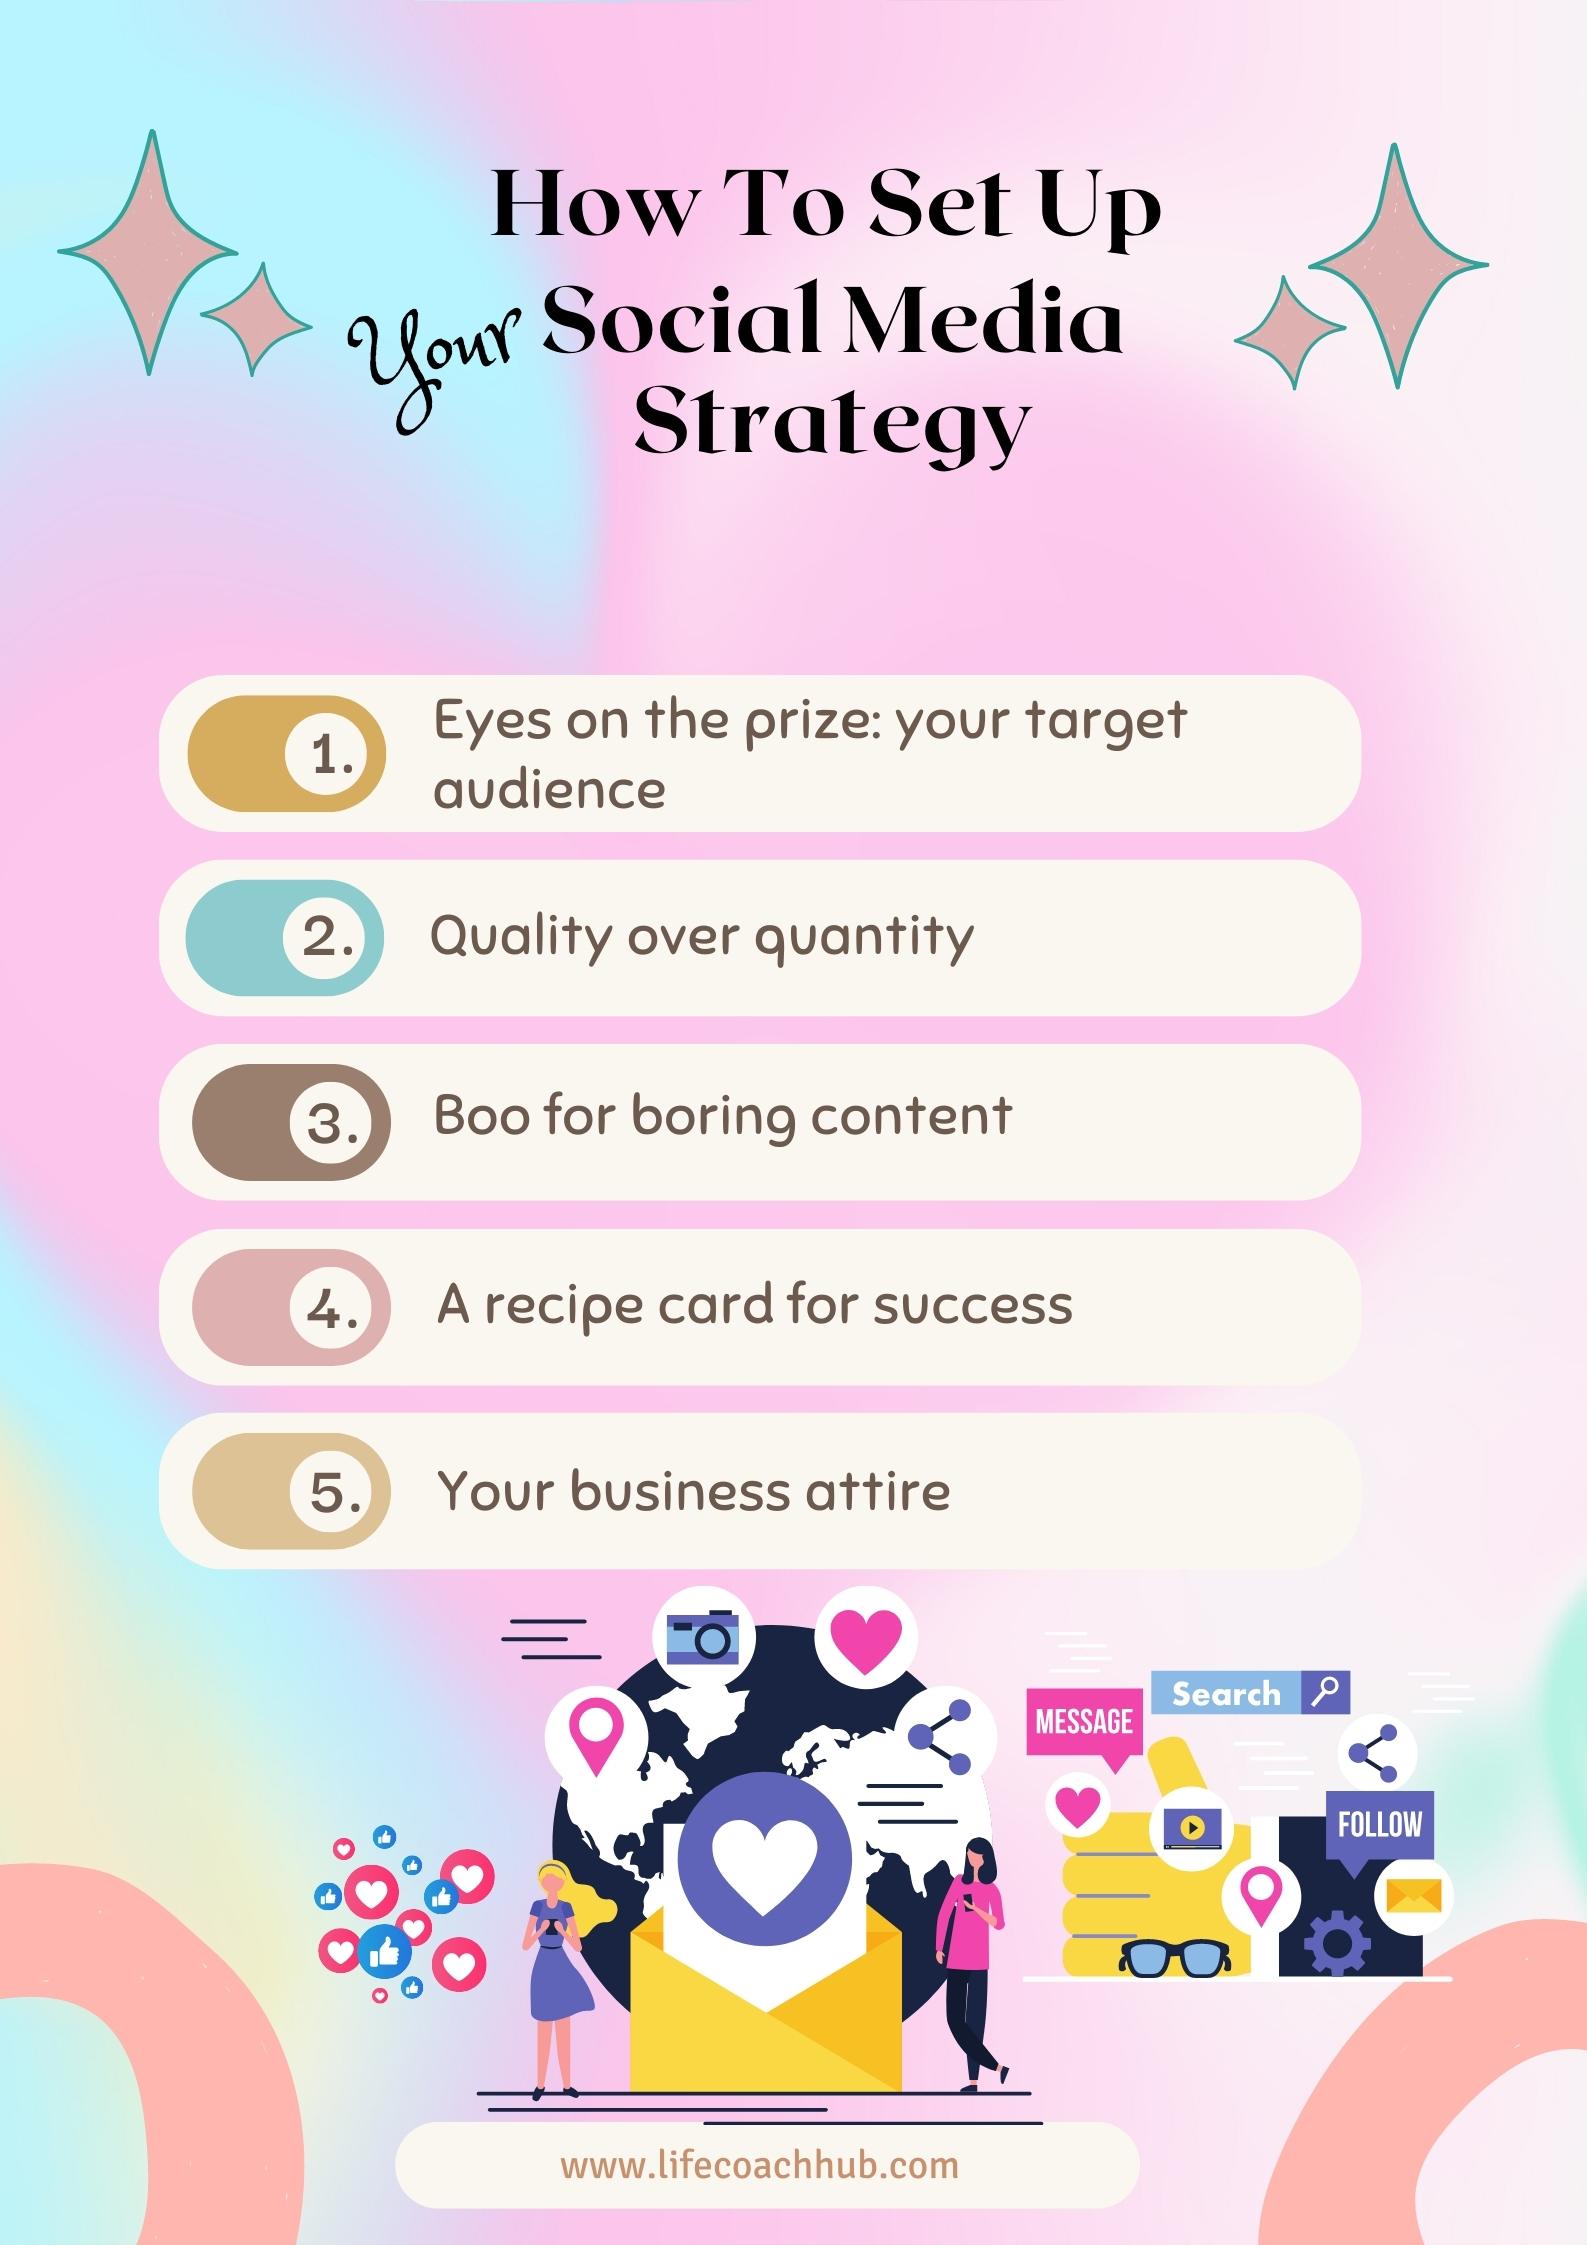 How to set up your social media strategy